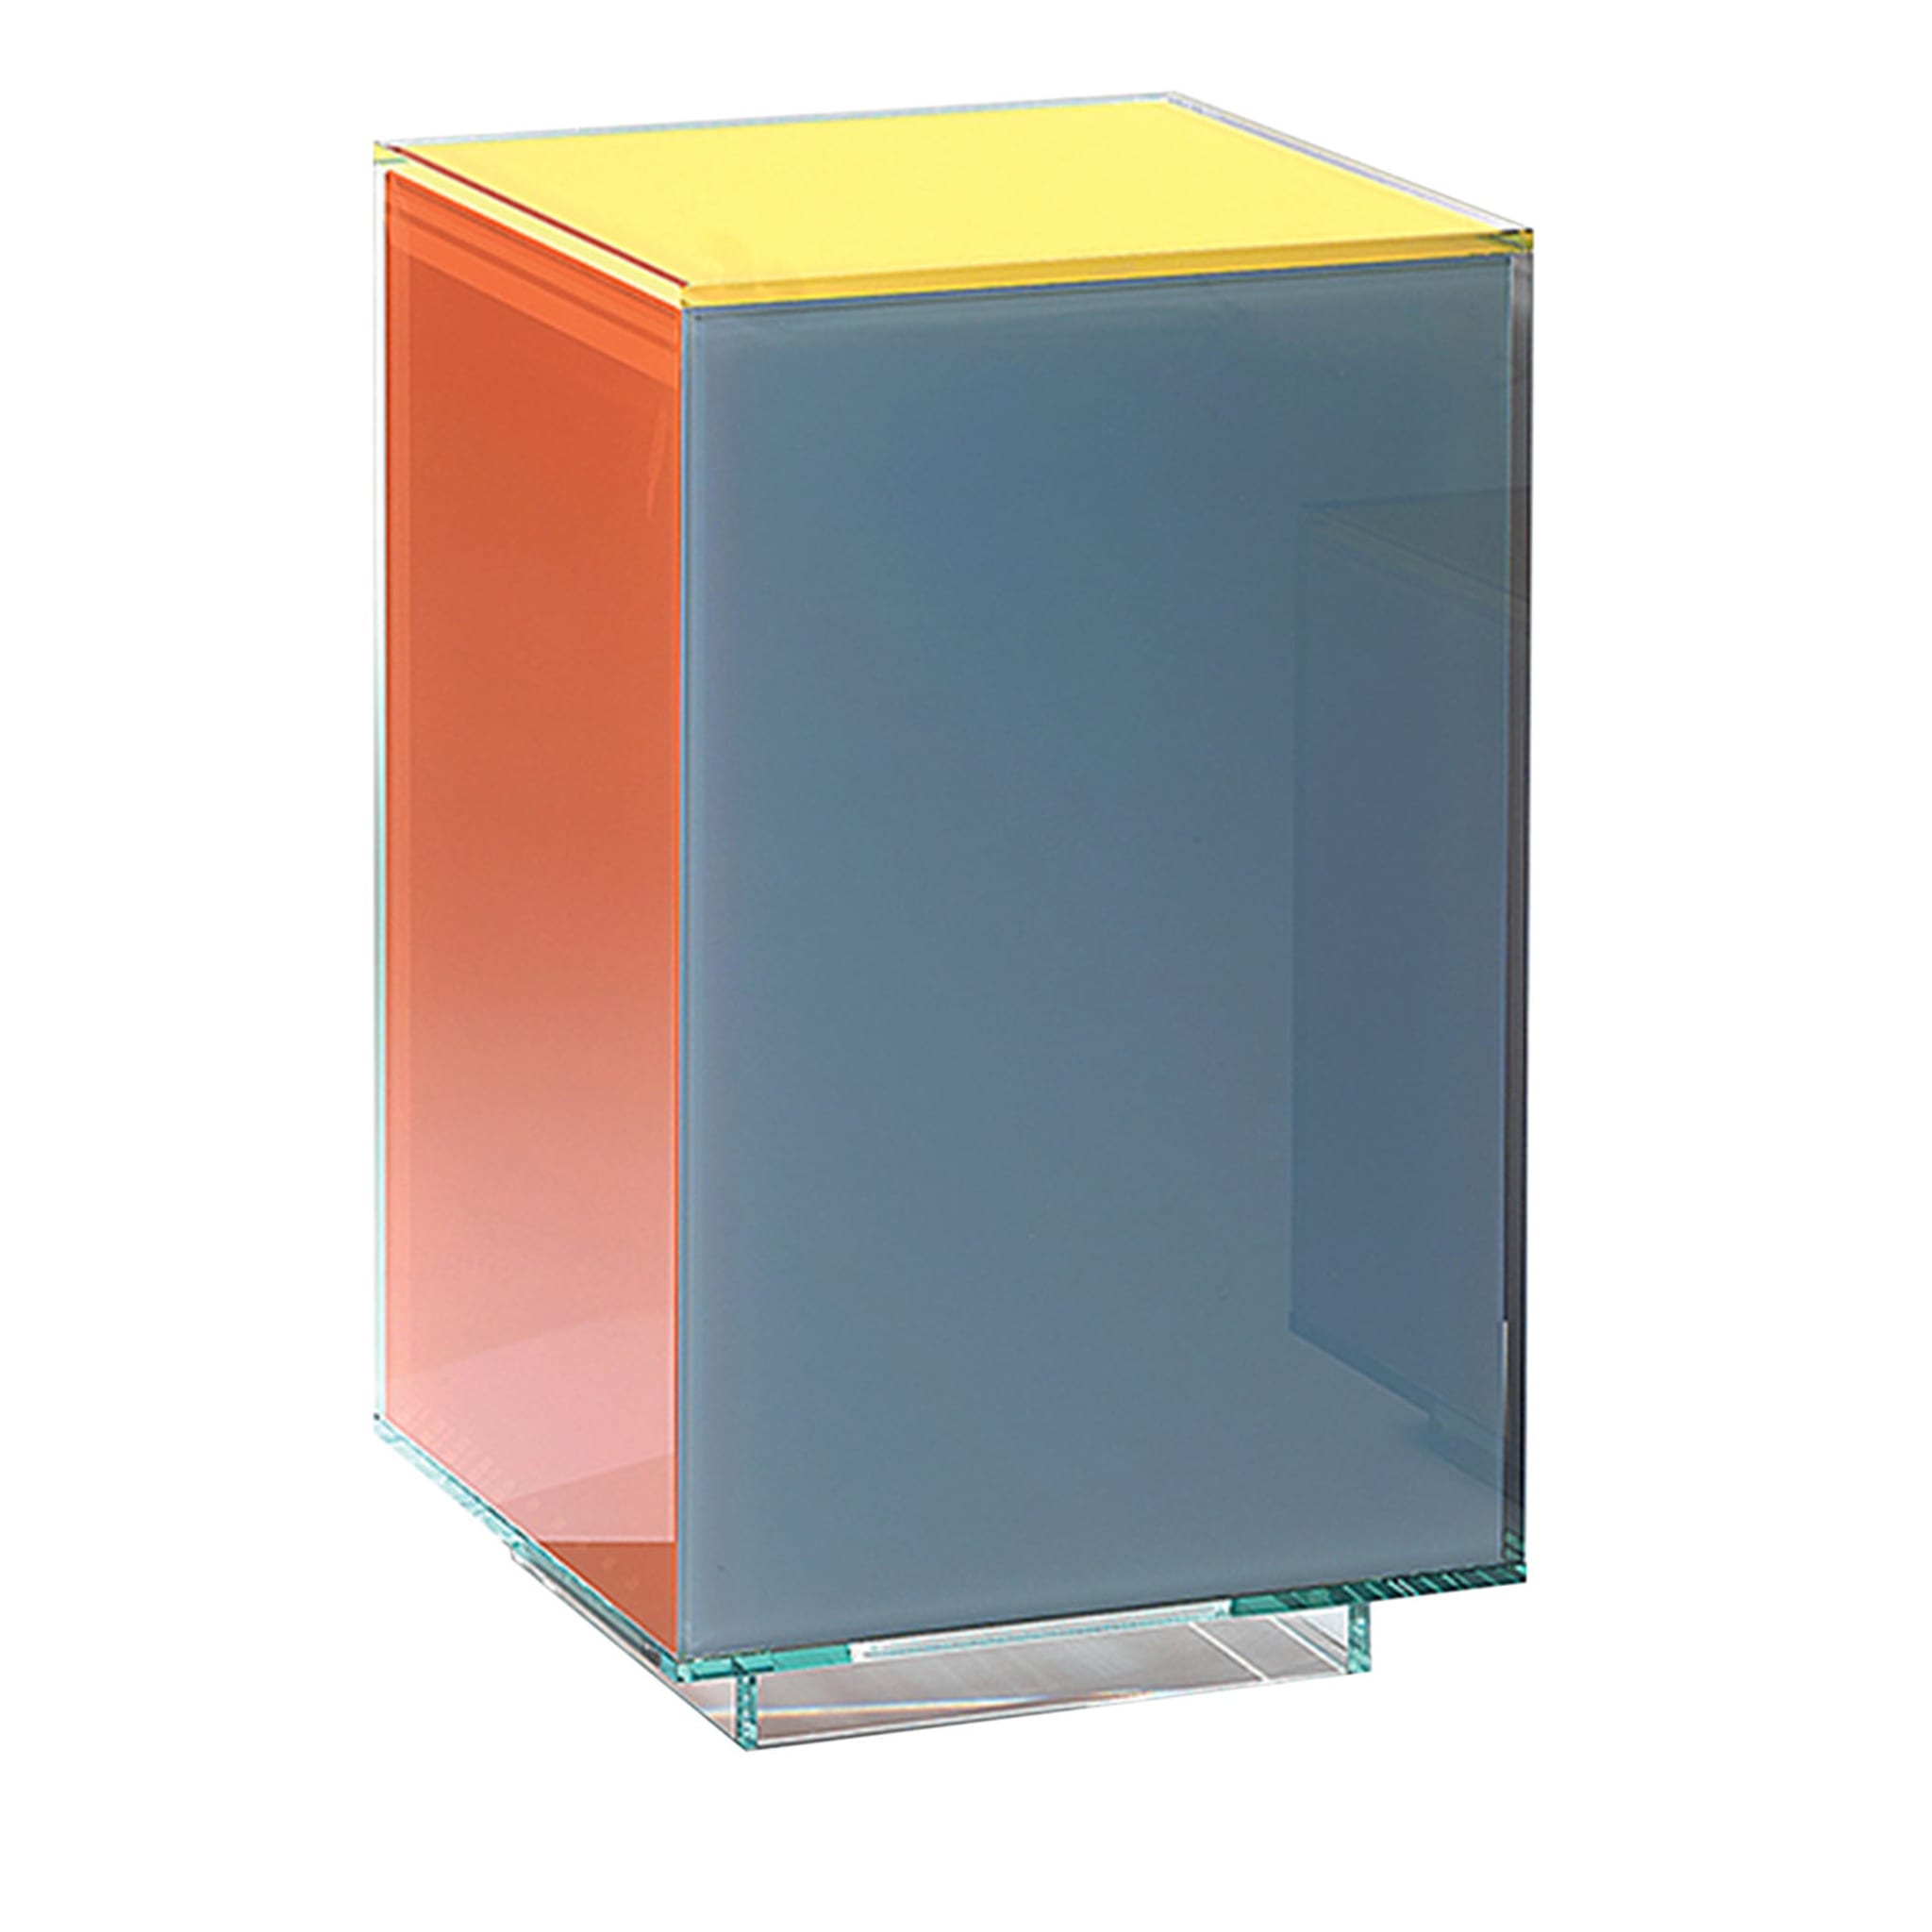 Cubicolor Large Side Table by Daniele Merini - Main view